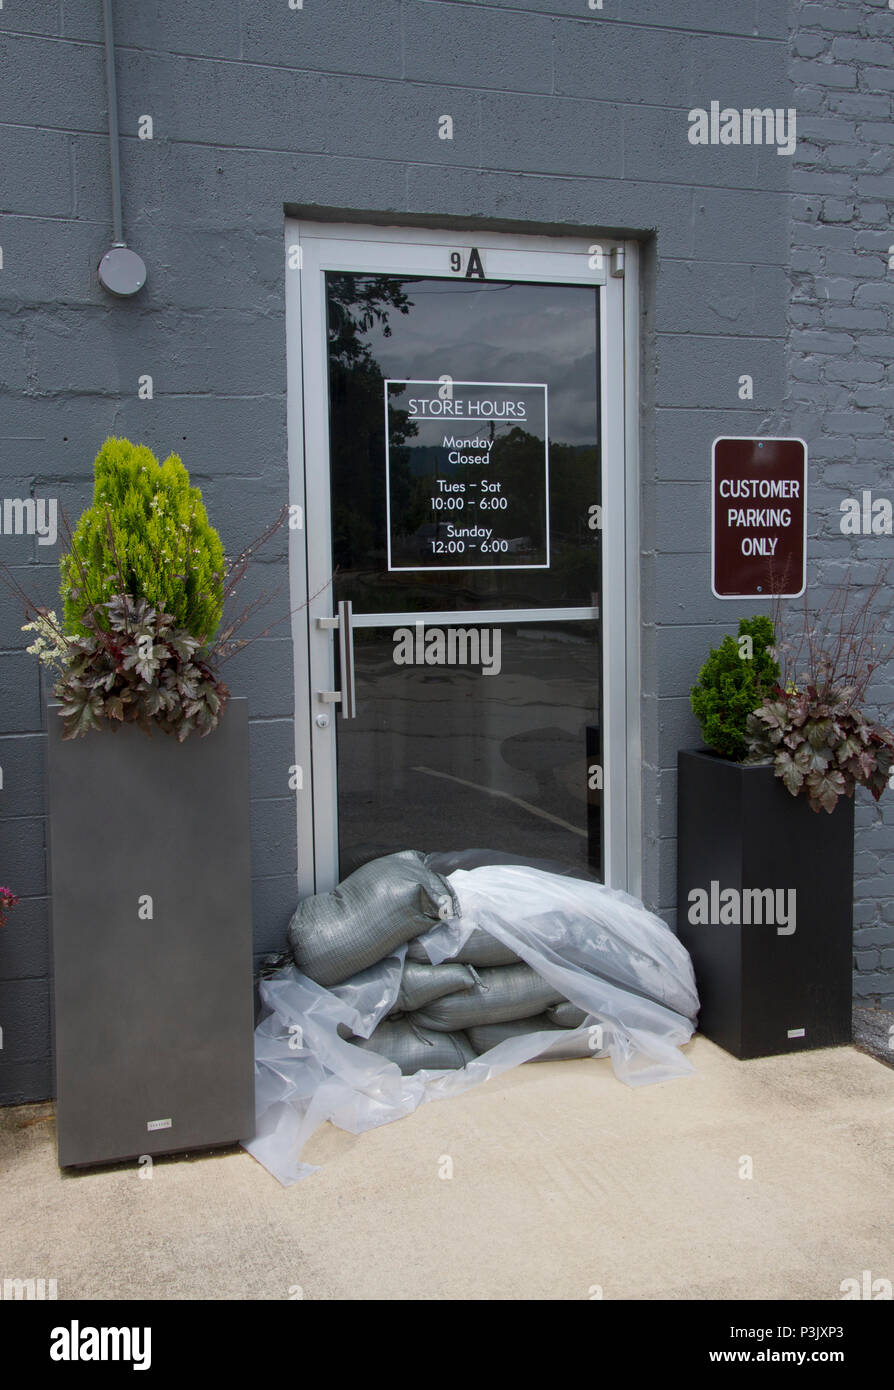 BILTMORE FOREST, NORTH CAROLINA-MAY 30, 2018: A glass store door has sand bags piled on the ground in front of it to protect from rising flood waters  Stock Photo